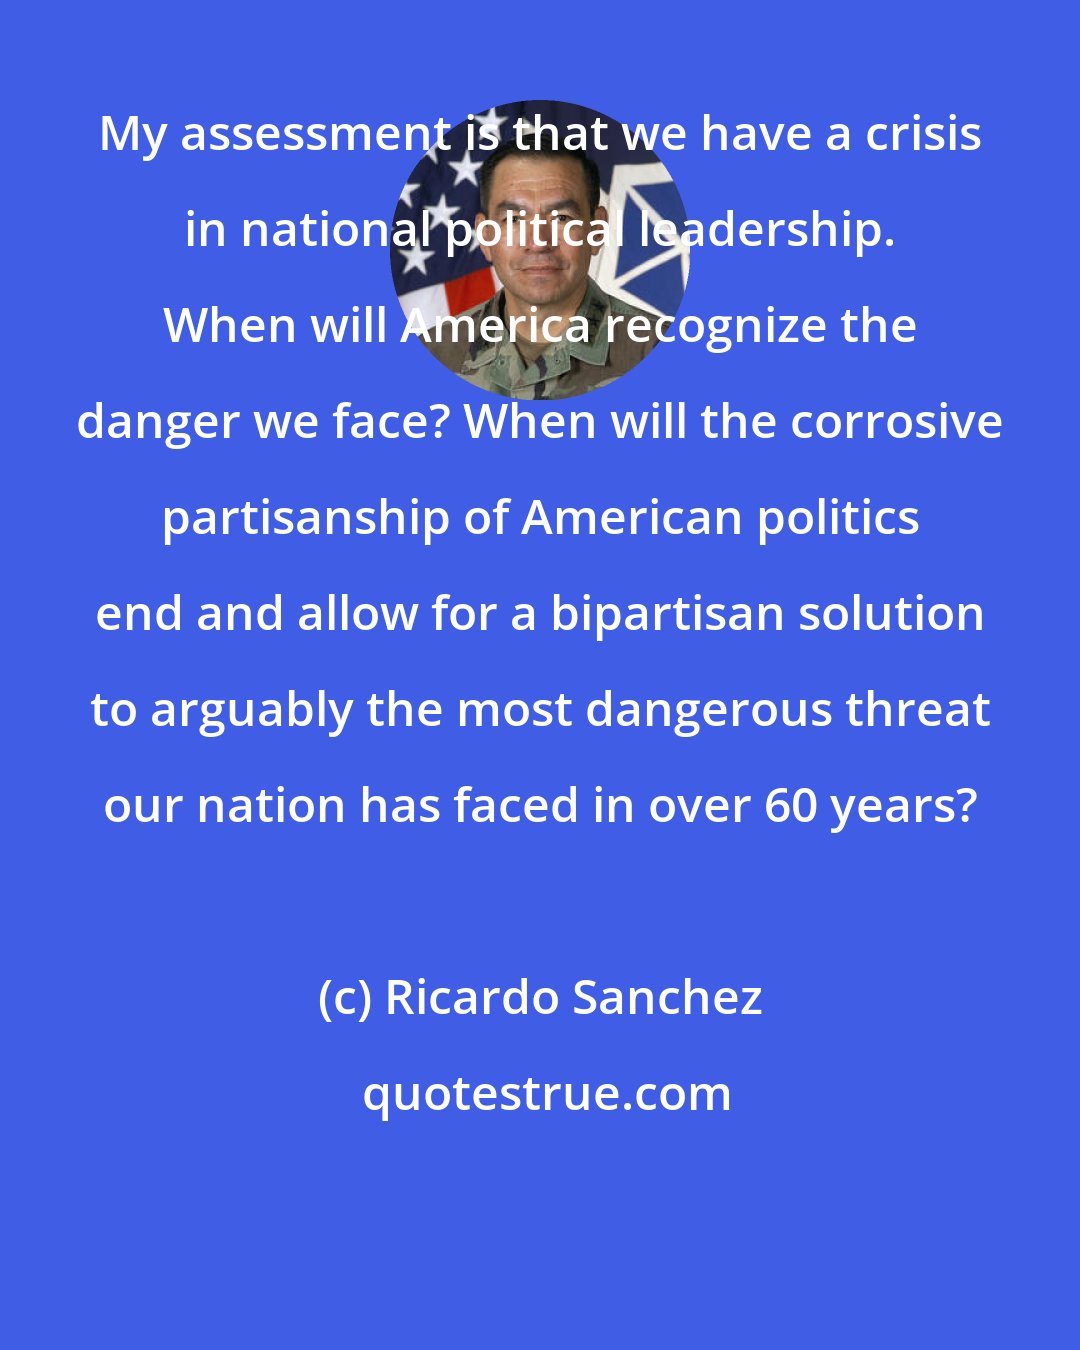 Ricardo Sanchez: My assessment is that we have a crisis in national political leadership. When will America recognize the danger we face? When will the corrosive partisanship of American politics end and allow for a bipartisan solution to arguably the most dangerous threat our nation has faced in over 60 years?